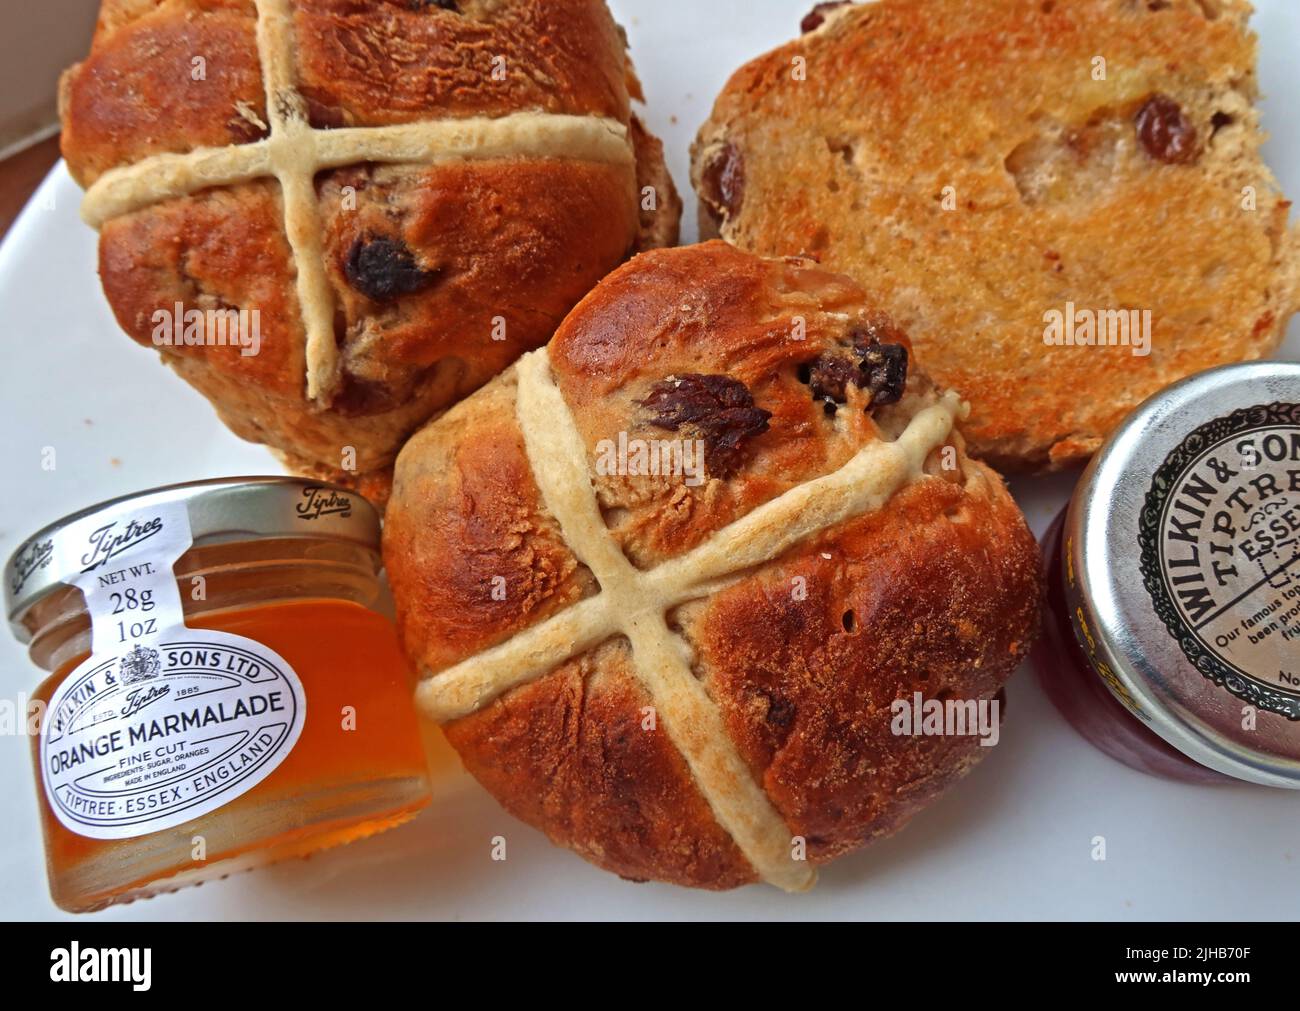 Hot Cross buns, available all year round,marmalade,jam for breakfast toasted, on a plate, UK Stock Photo